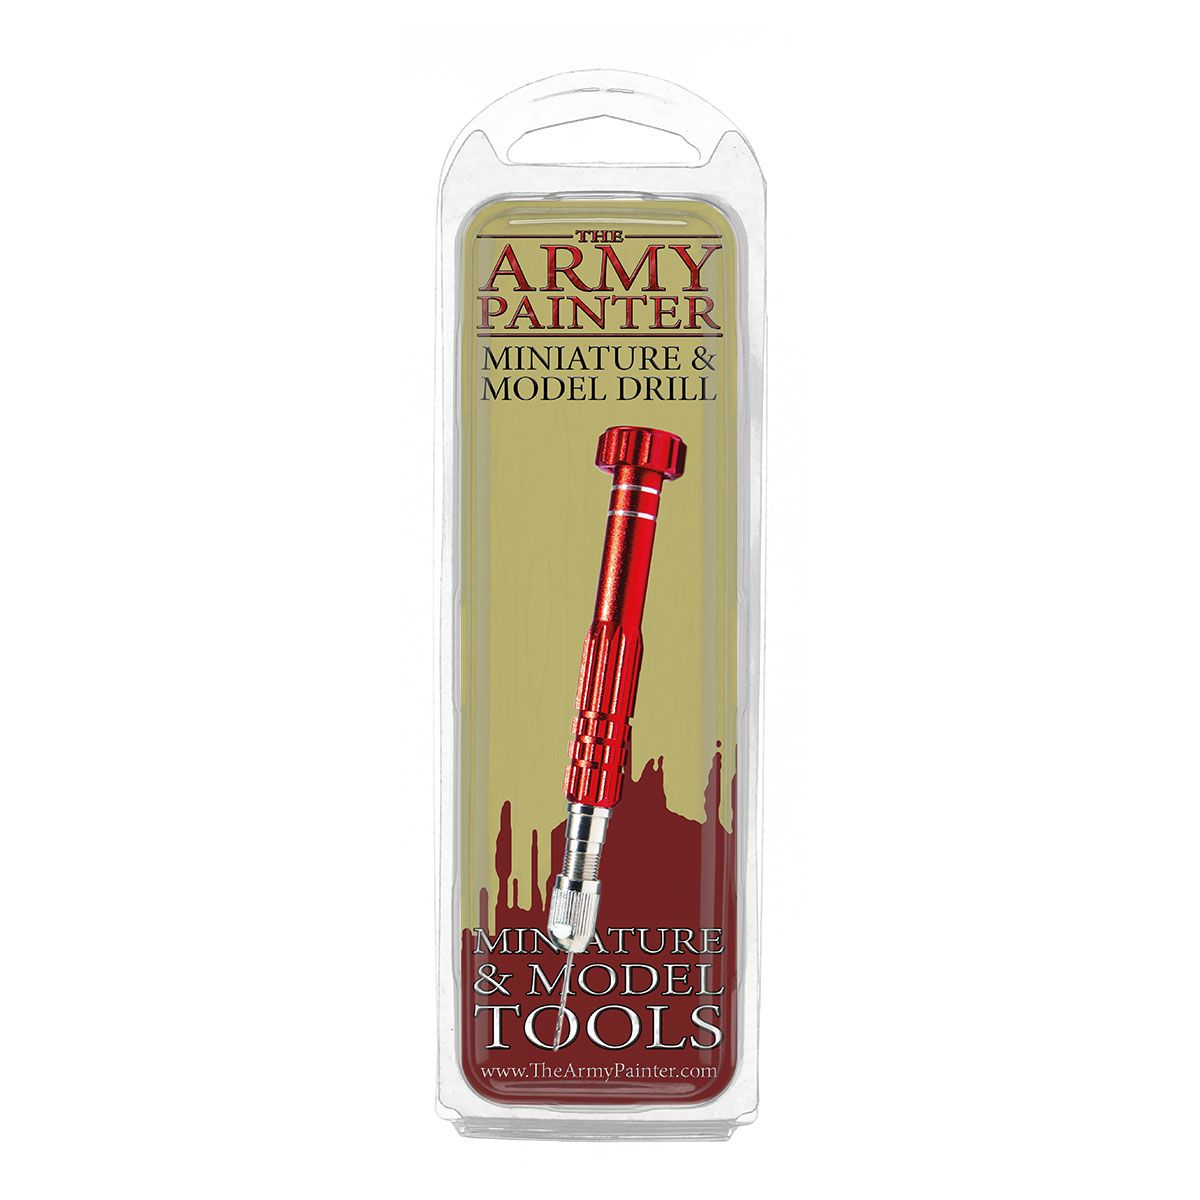 MINIATURE & MODEL DRILL - TL5031 - The Army Painter